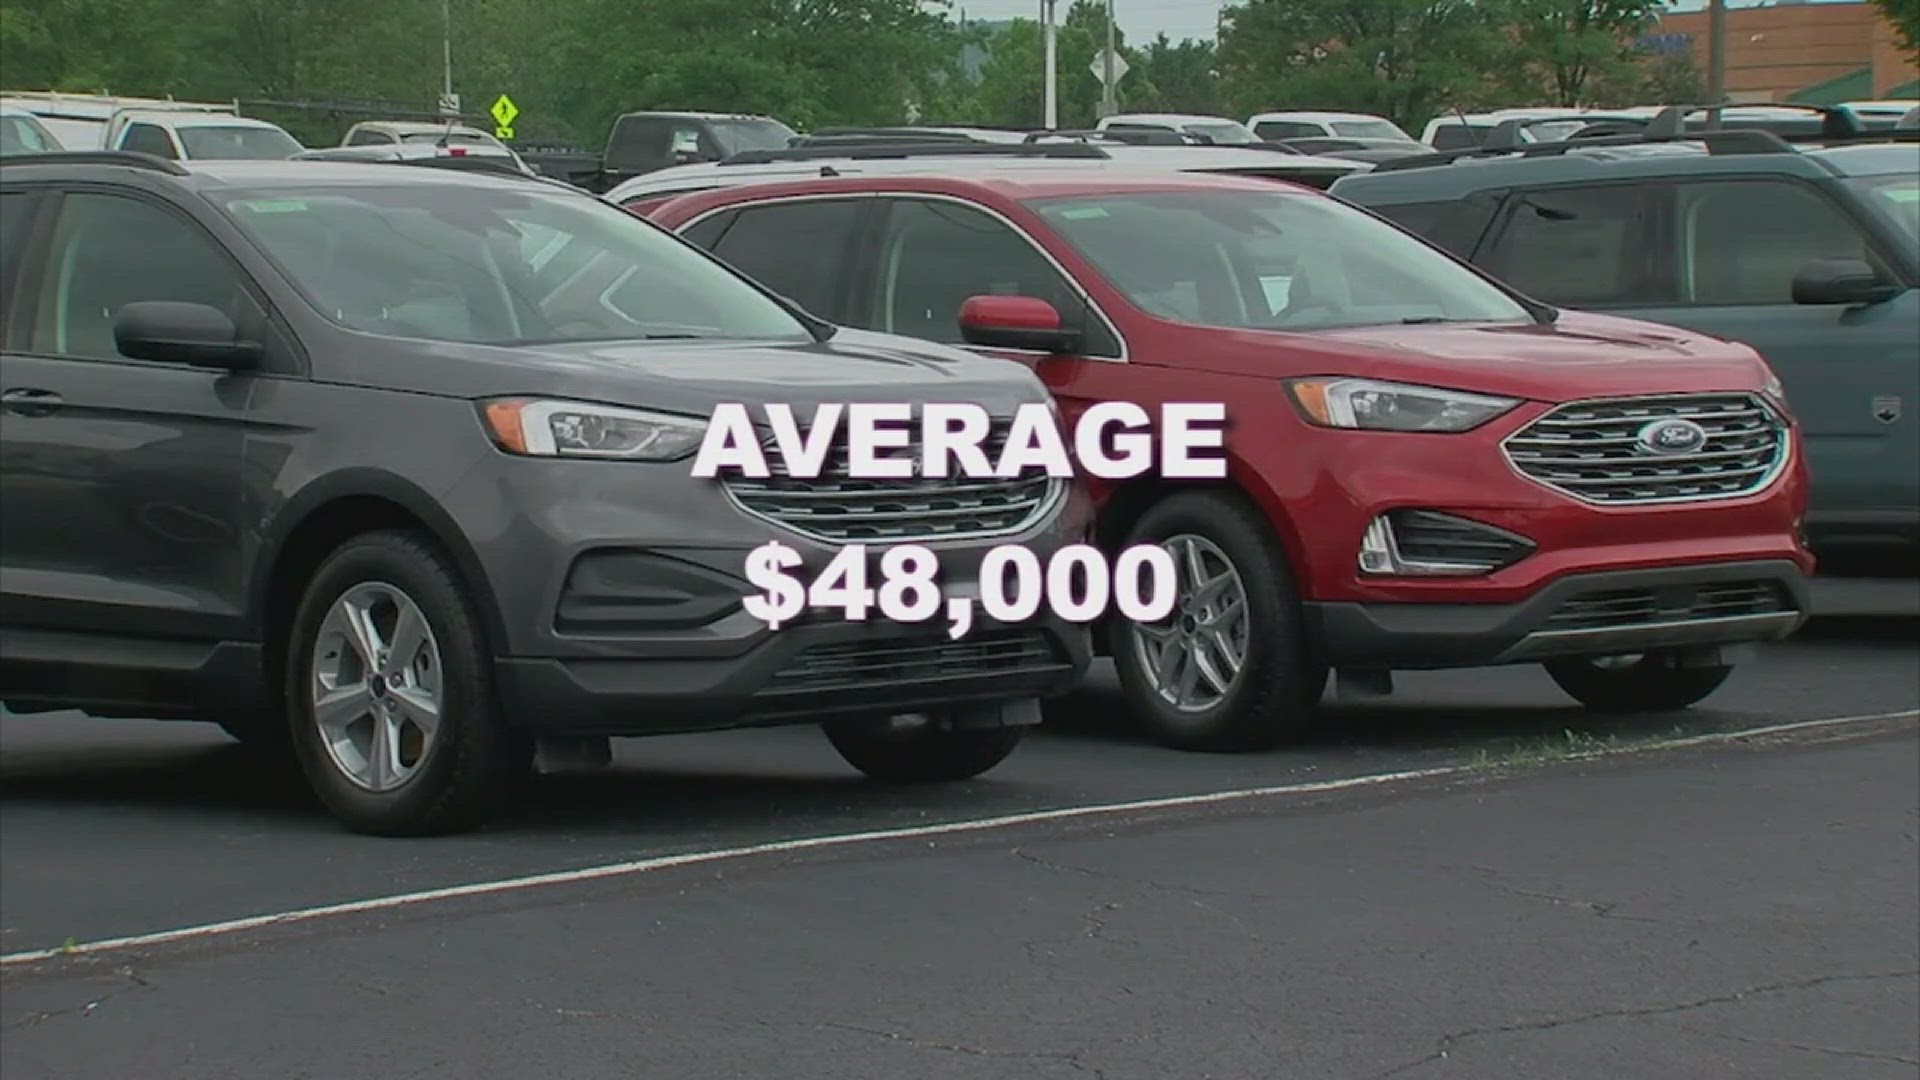 With the average new car price now at $48,000, many buyers are turning to used cars, but those prices remain high.